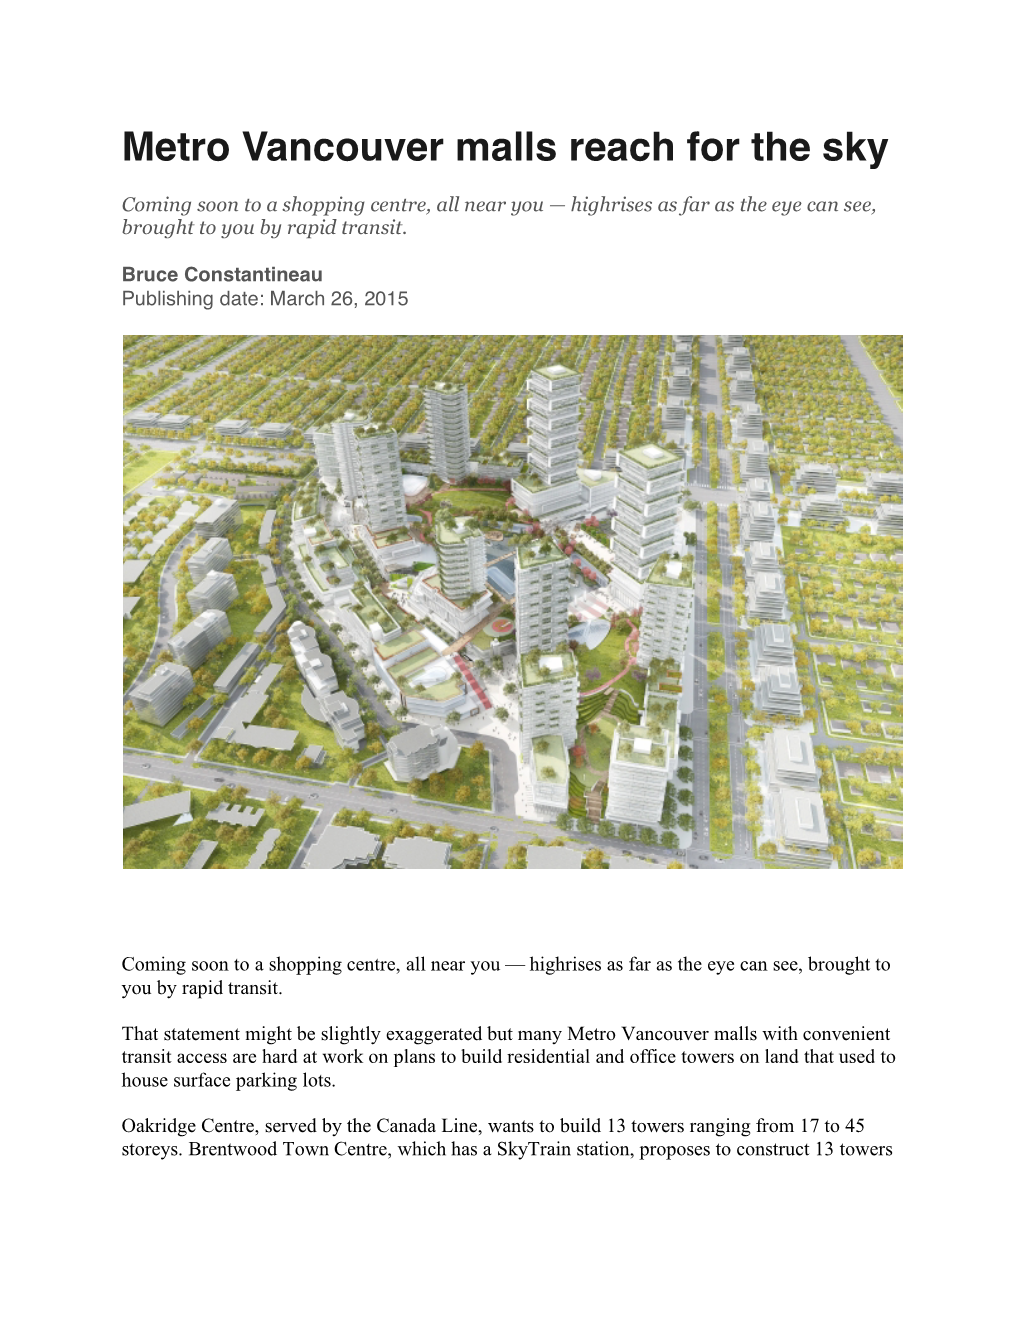 Metro Vancouver Malls Reach for the Sky